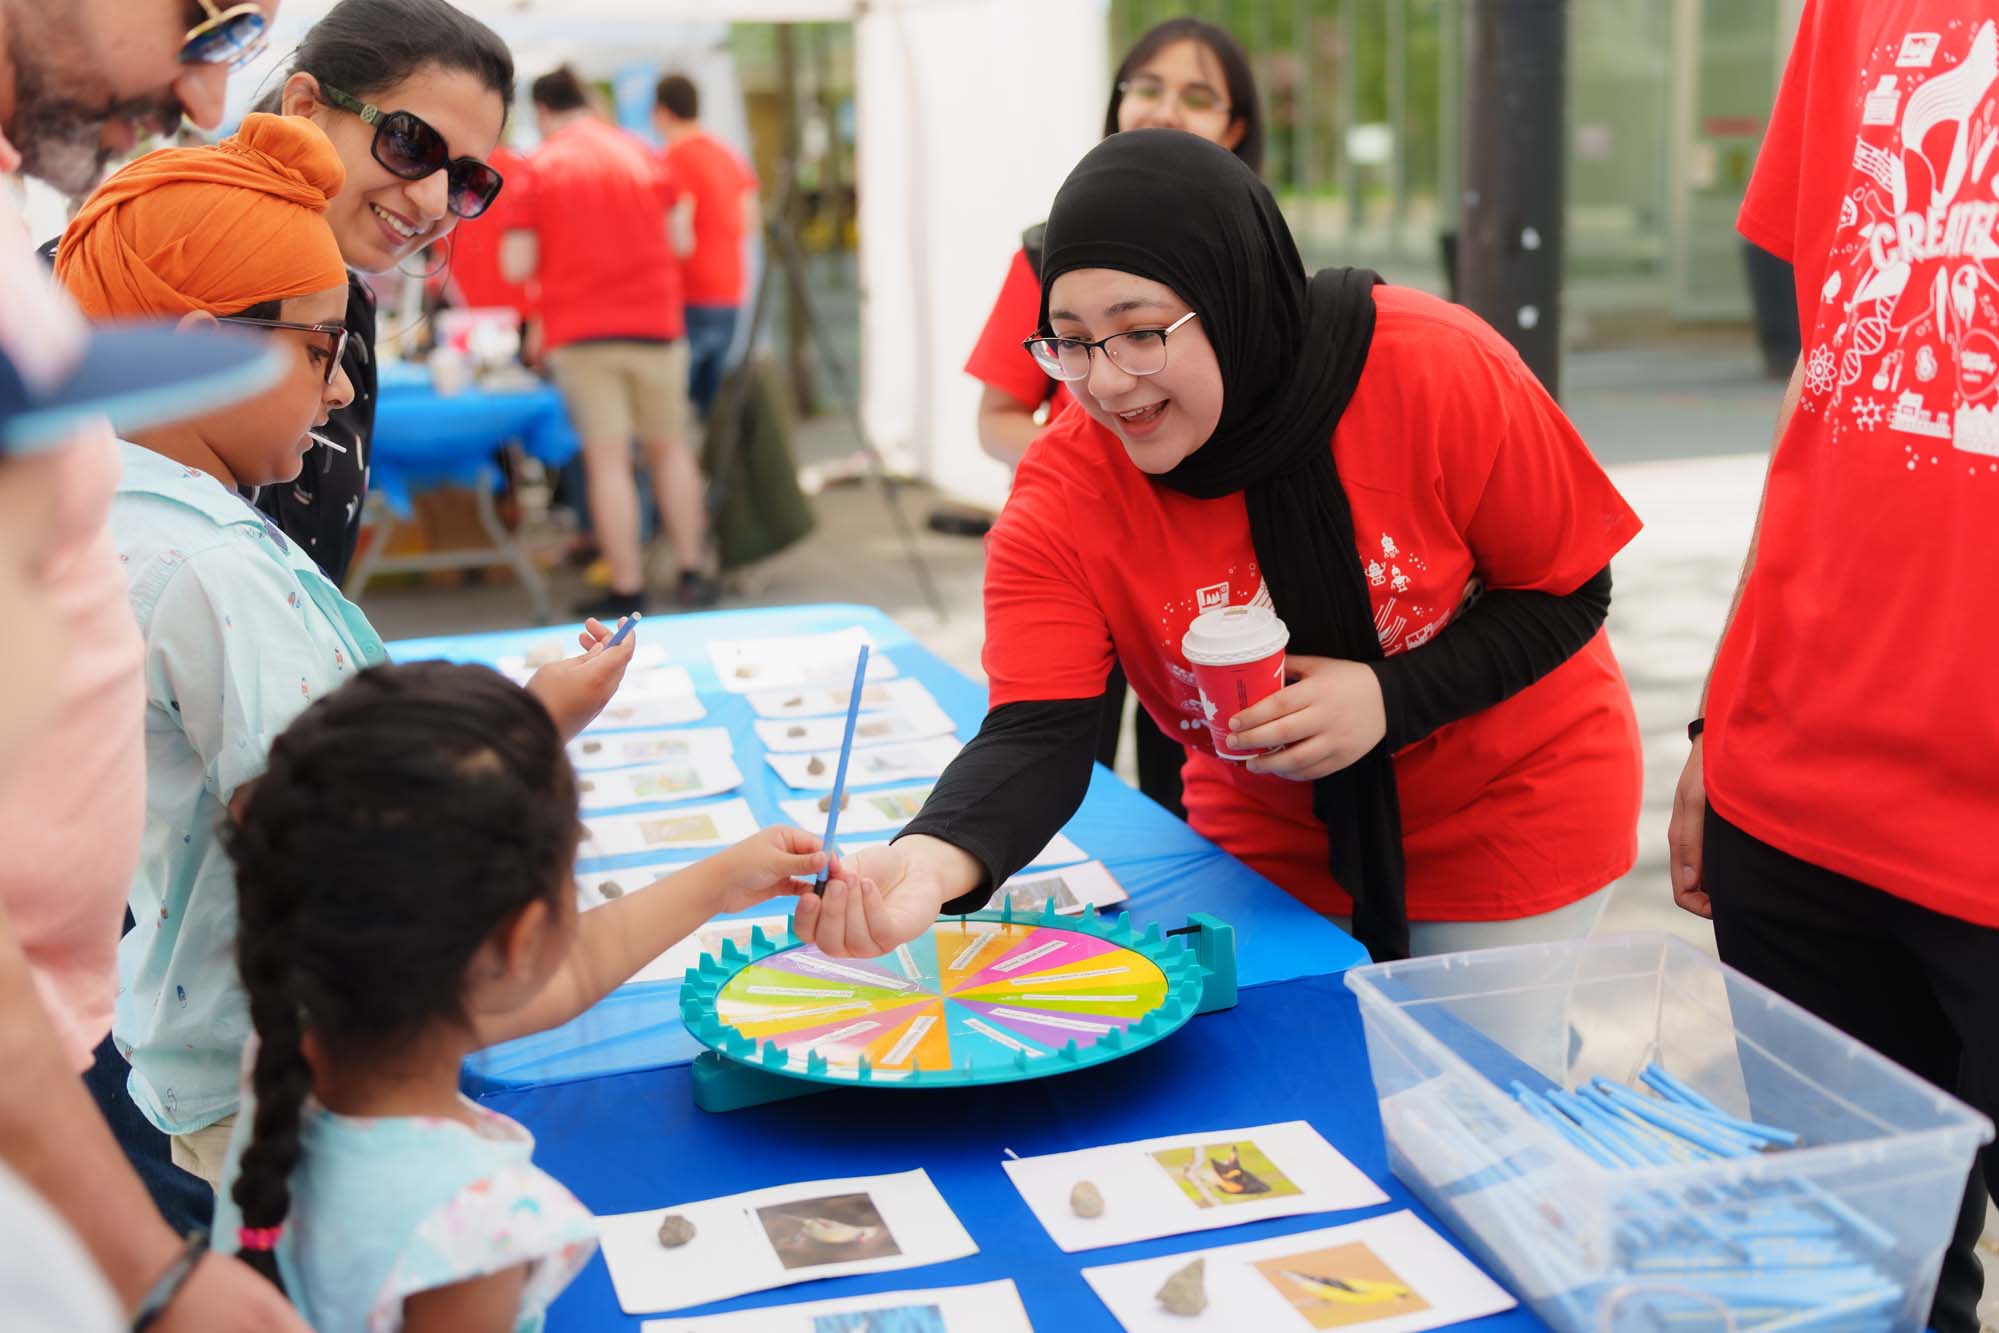 A volunteer giving a blue thermosensotive pencil to a child after playing the bird identification activity at the booth.